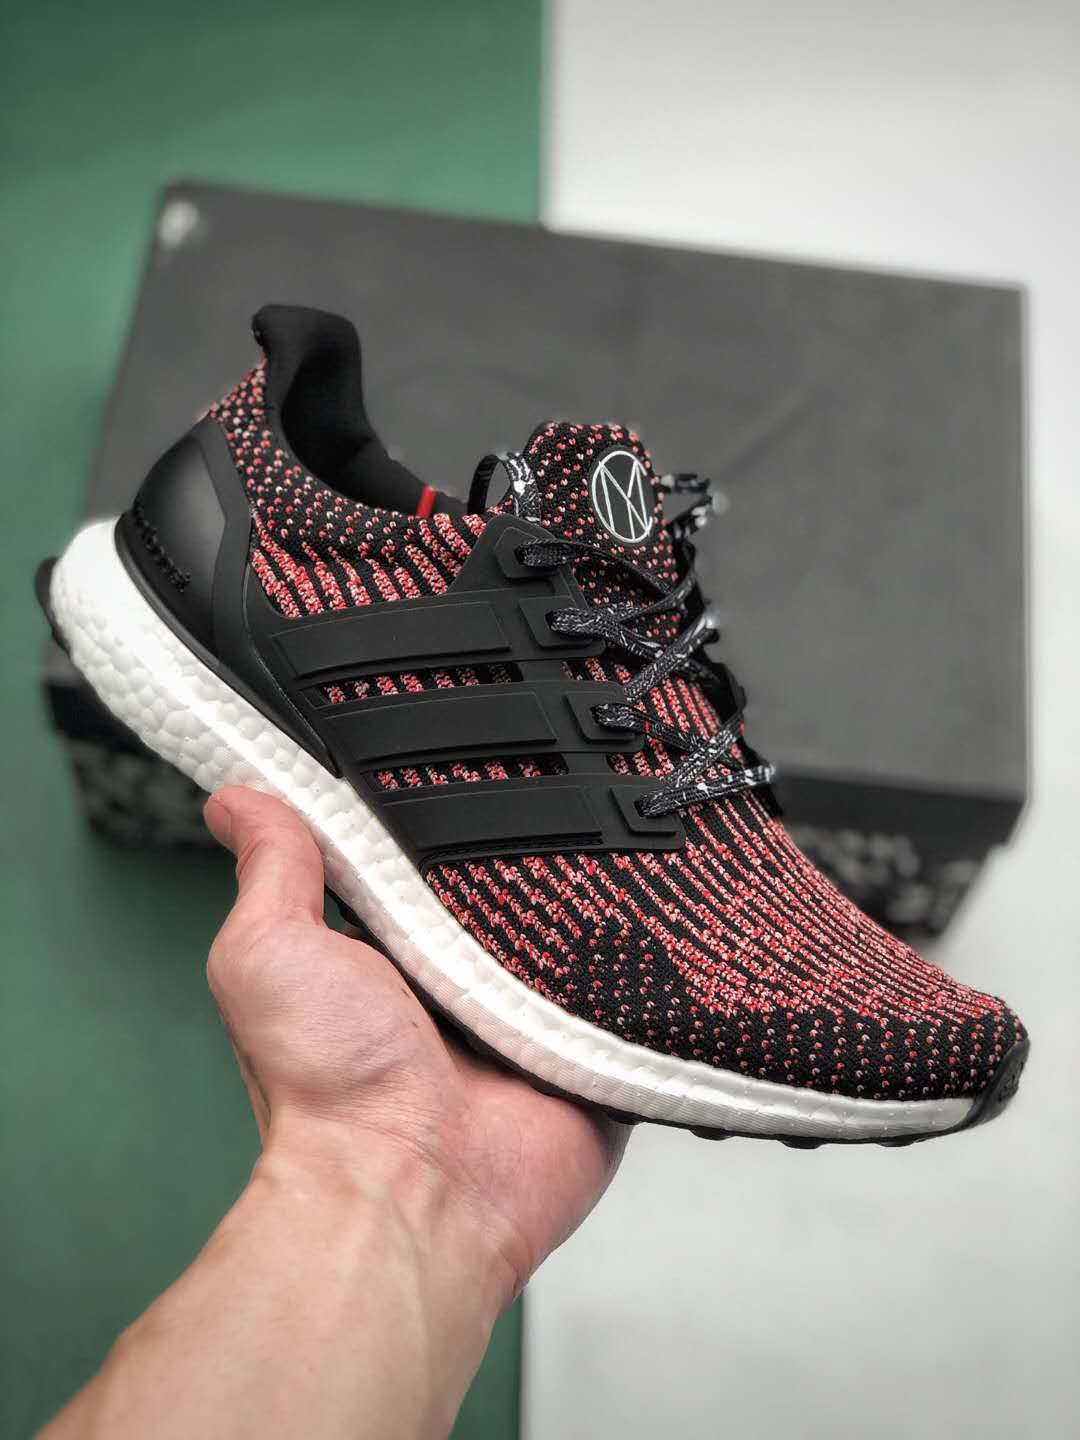 Adidas UltraBoost 3.0 'Chinese New Year' BB3521 - Celebrate with Limited Edition Sneakers